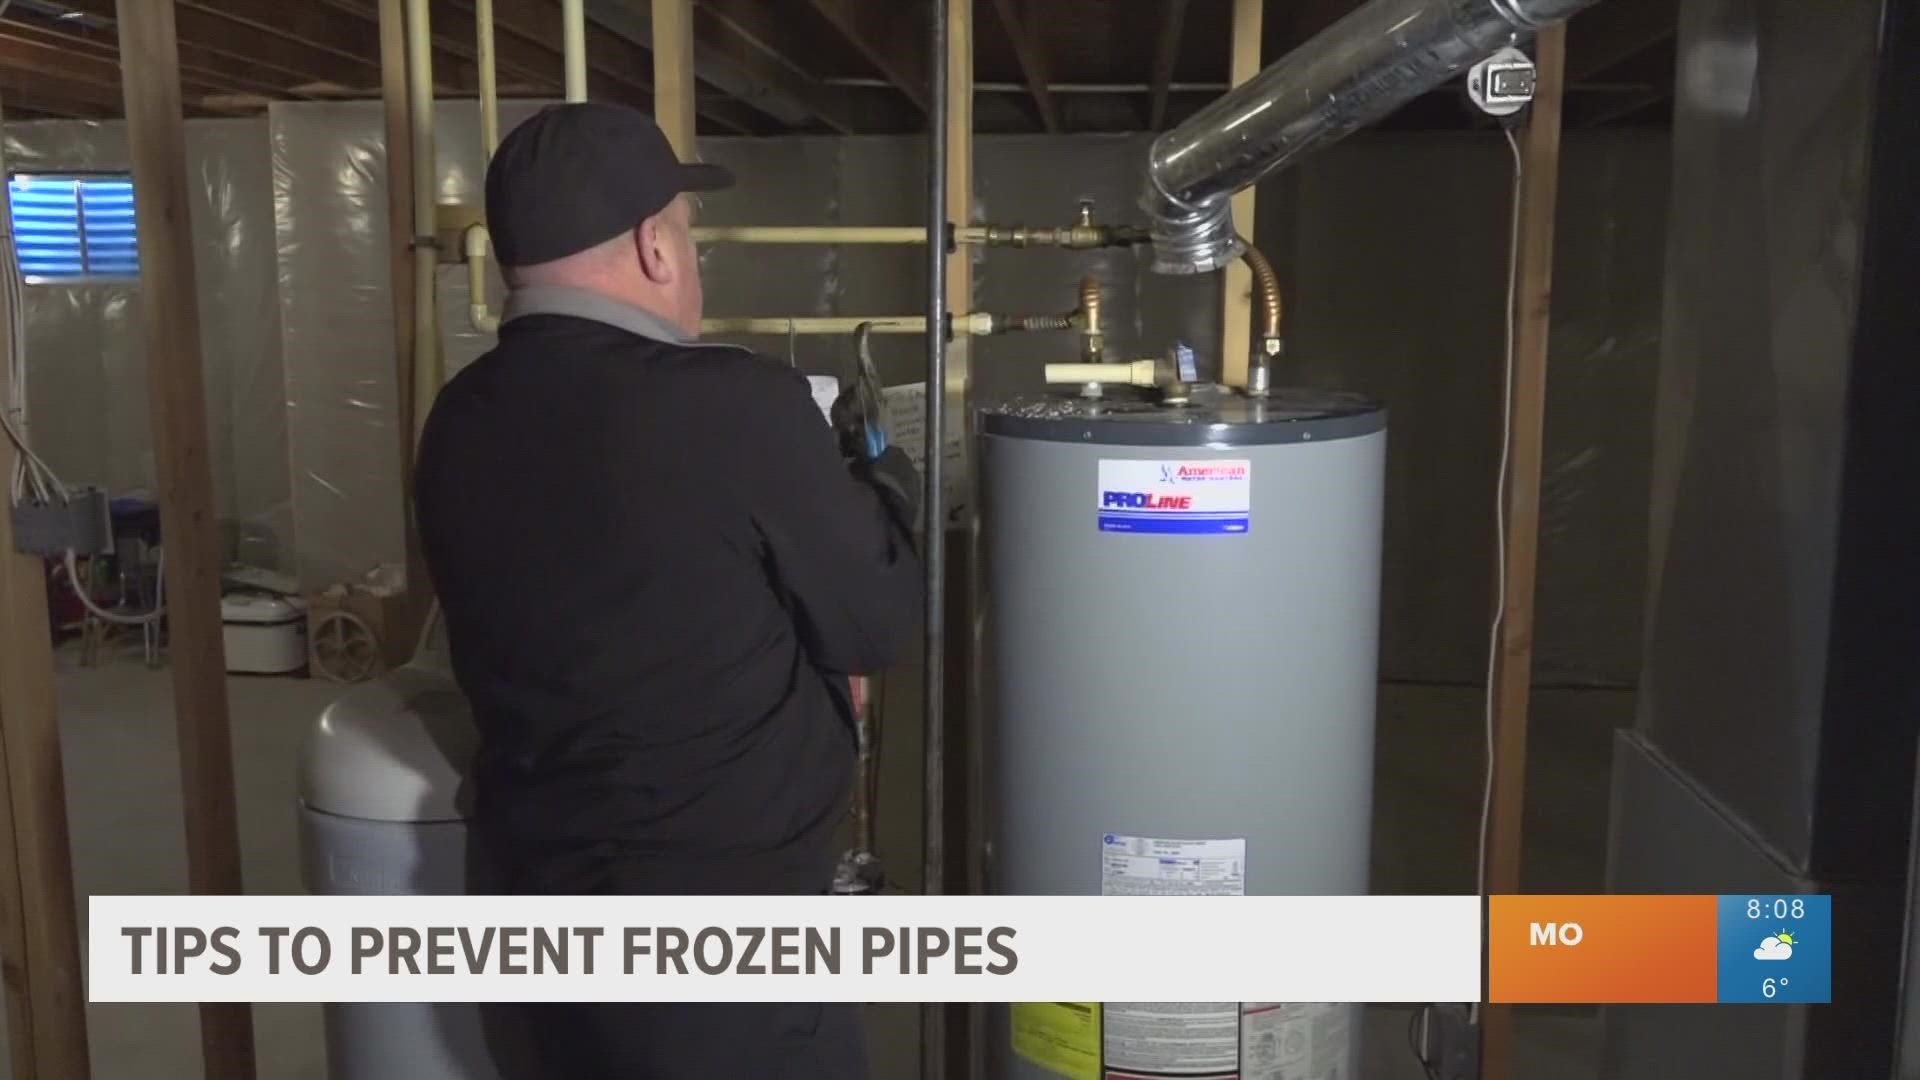 Spokane will see subzero temperatures tonight, which means a threat of freezing pipes.